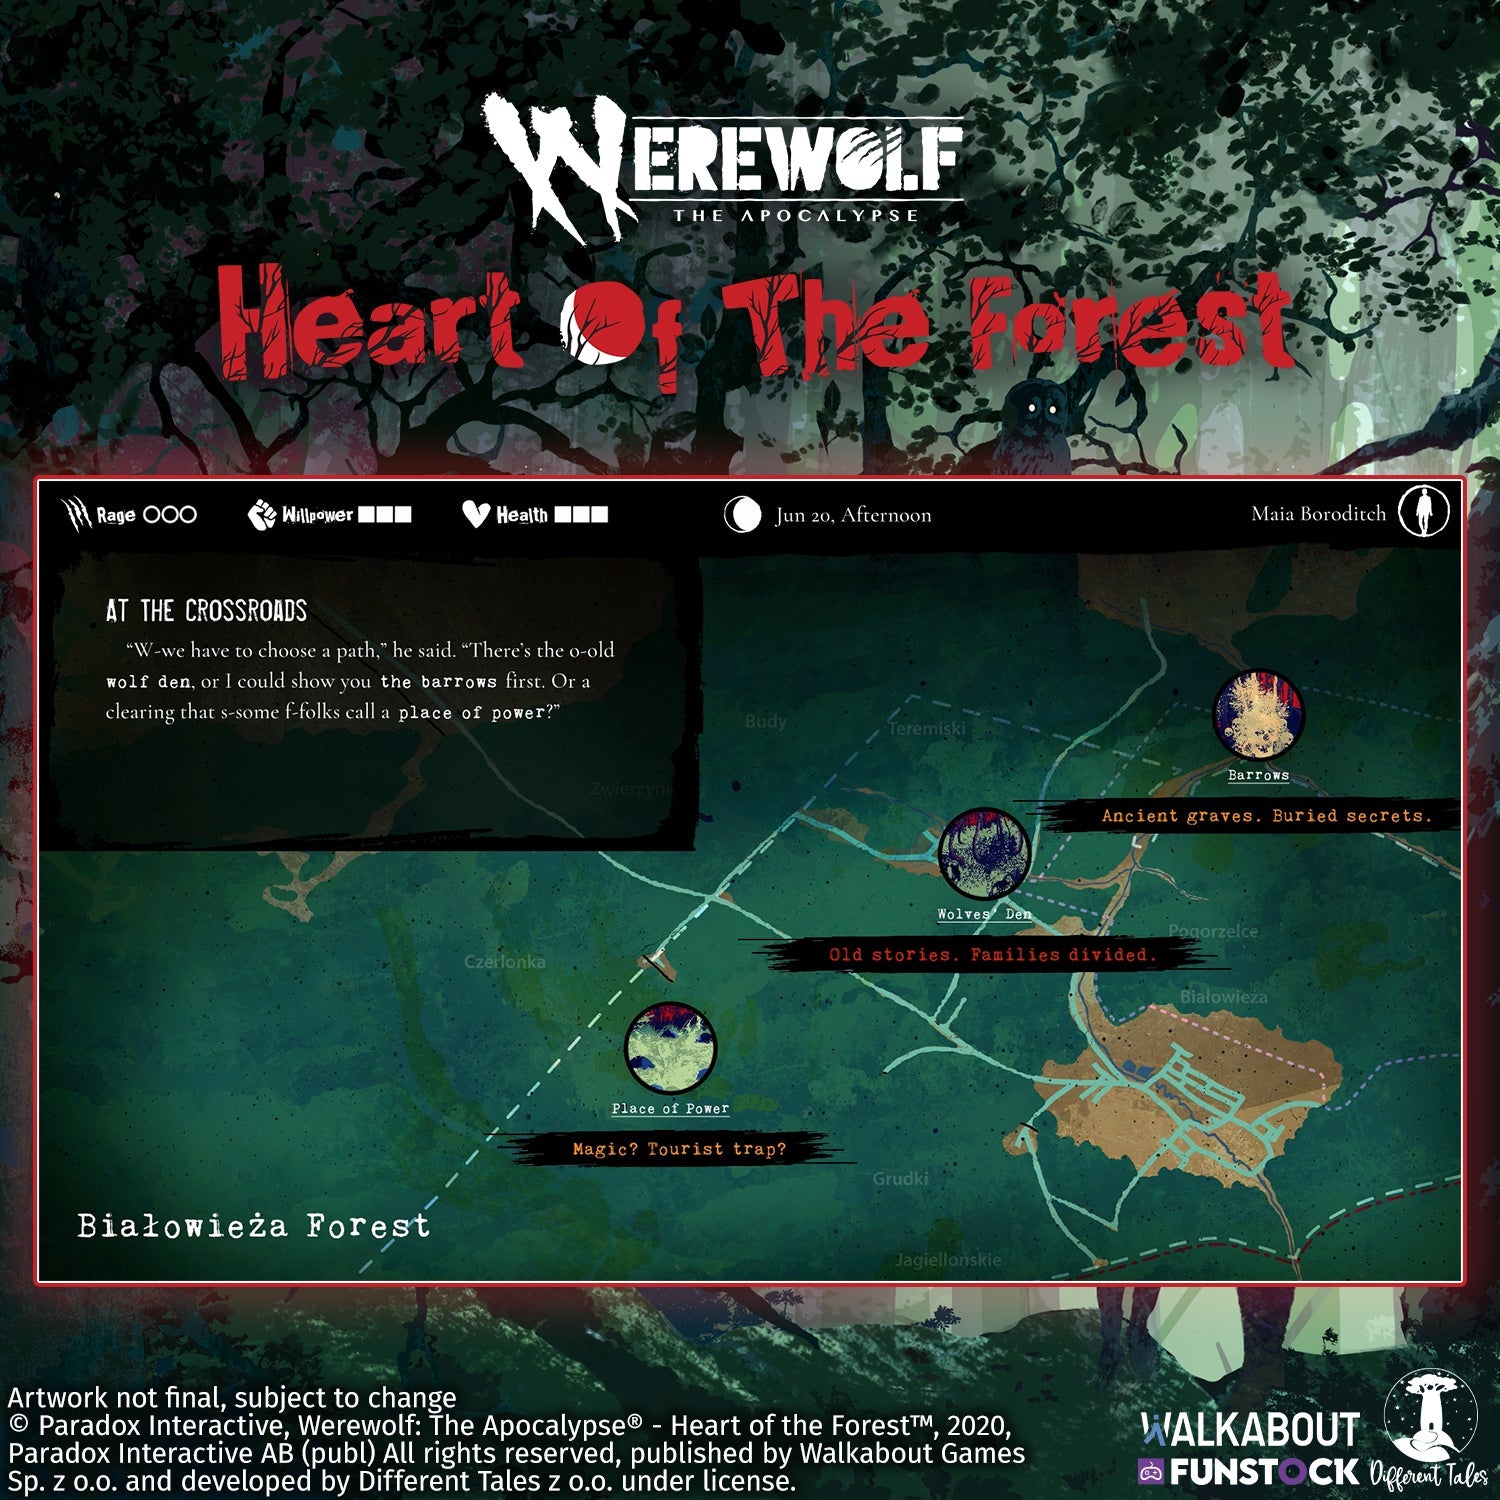 Werewolf: The Apocalypse - Heart of the Forest (Nintendo Switch)